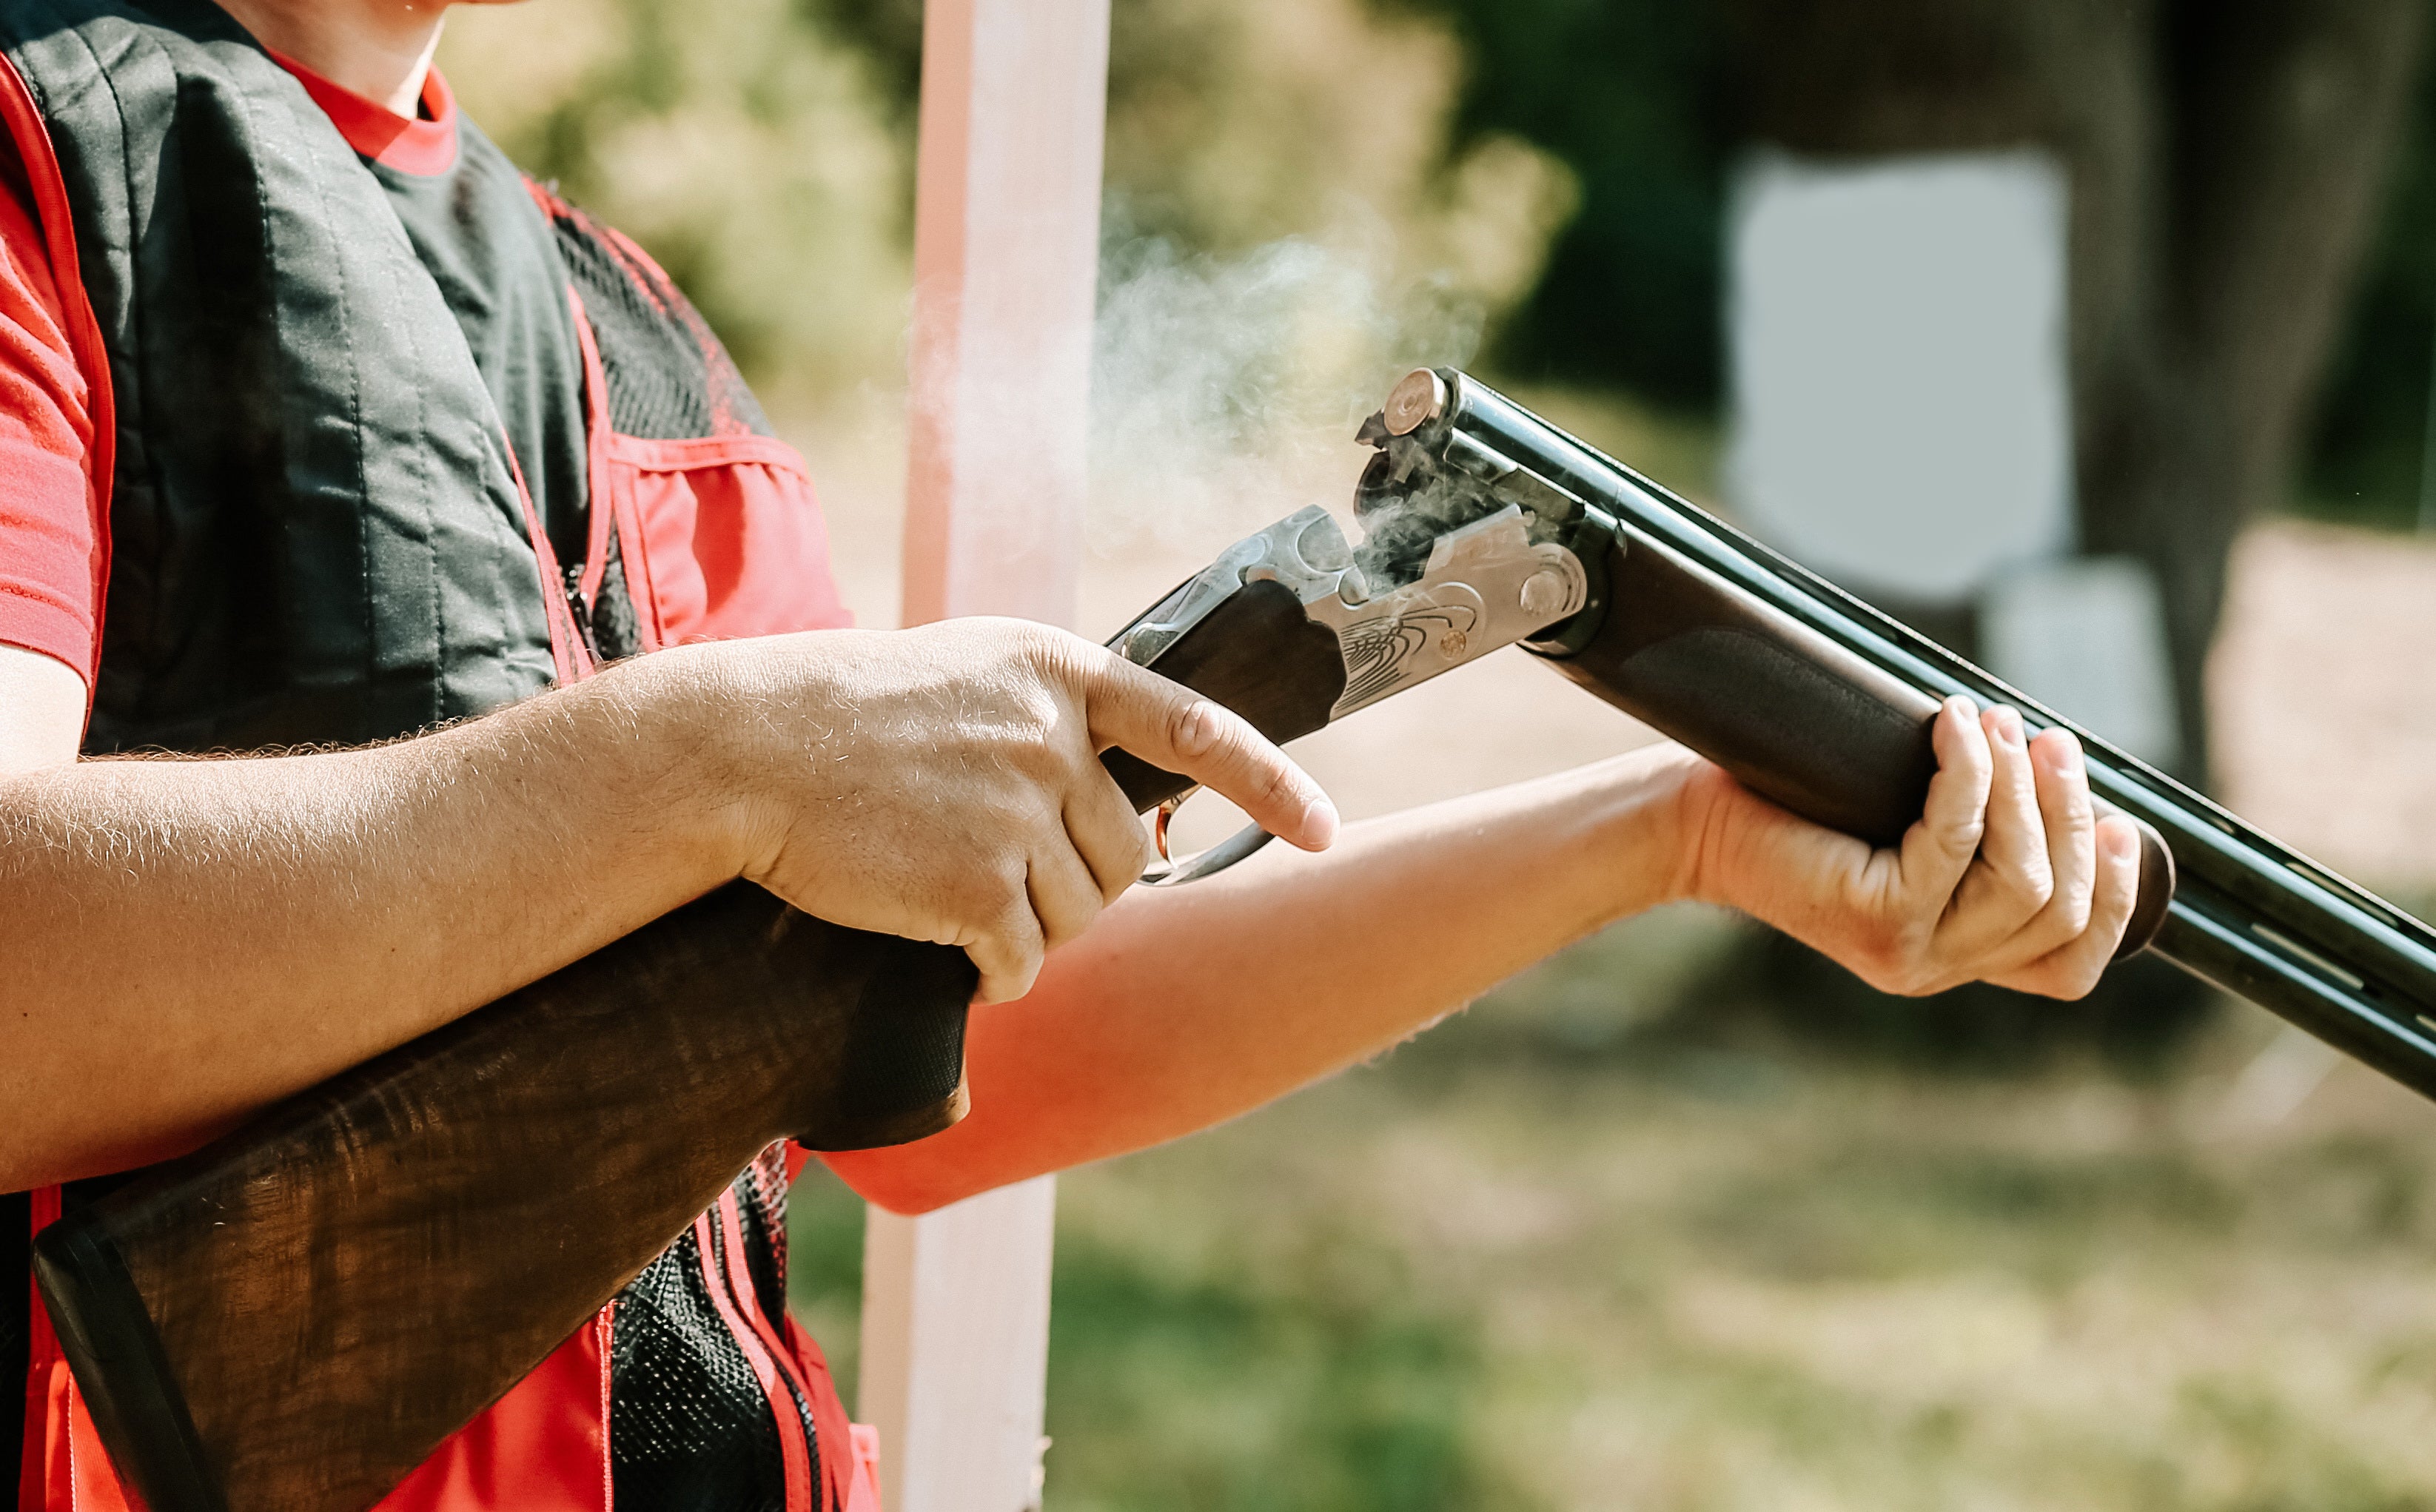 <a href="https://www.freepik.com/free-photo/man-opens-shotgun-bolt-after-one-shot-with-smoke_2454890.htm#query=Shotgun&position=1&from_view=search&track=sph">Image by freepic.diller</a> on Freepik